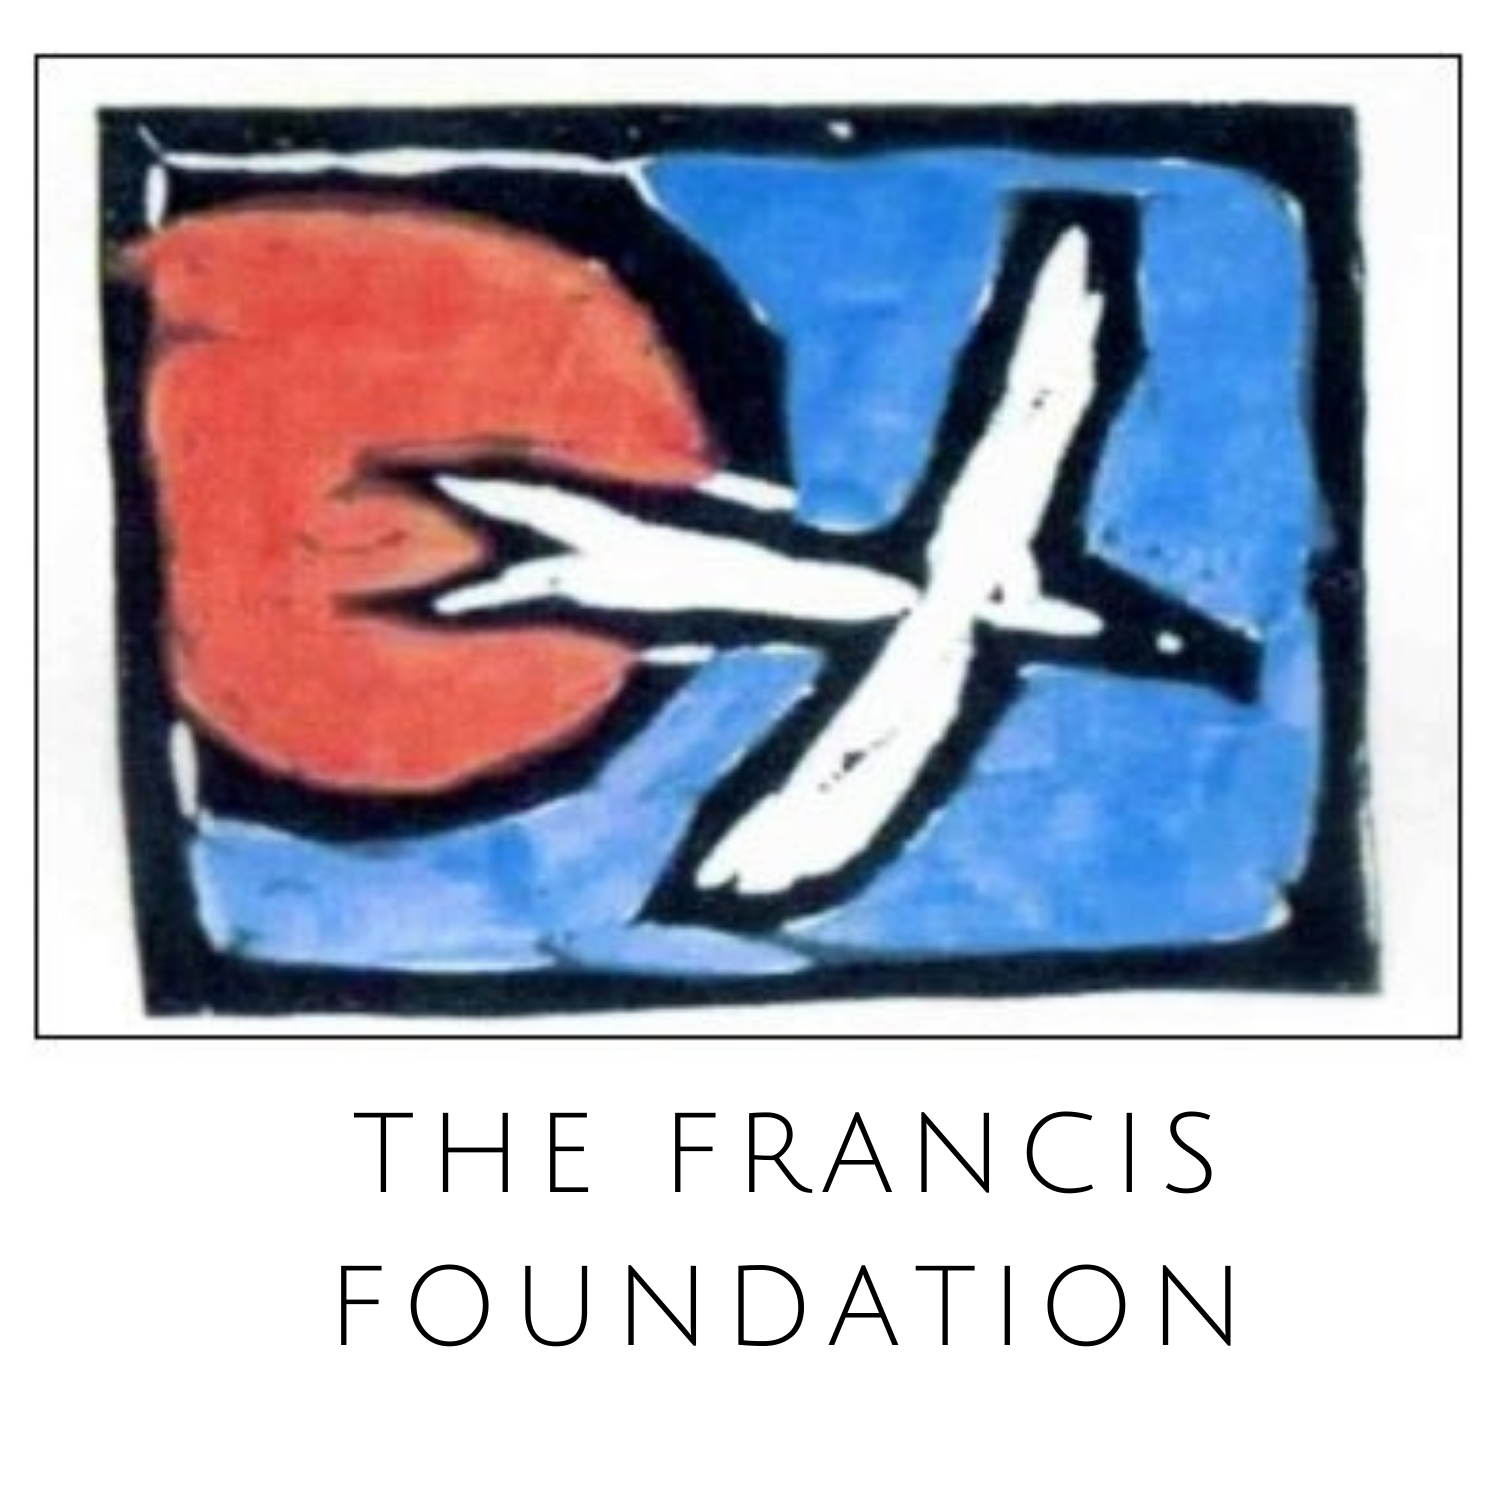 The Francis Foundation